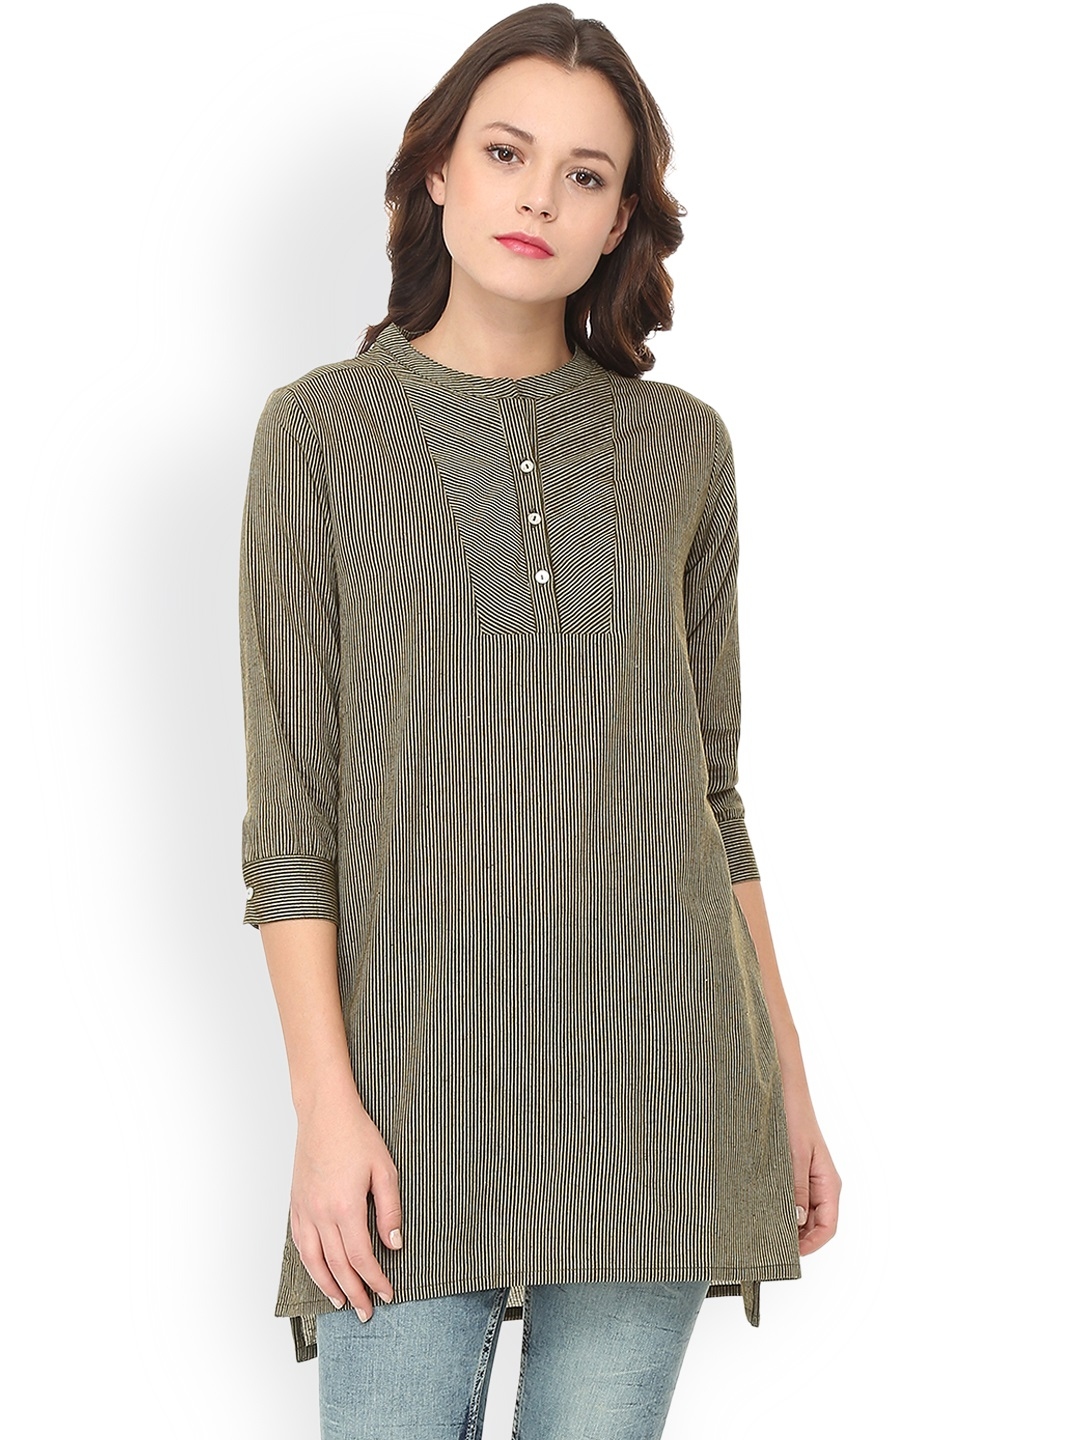 Buy People Olive Green Striped Tunic - Tunics for Women 9201613 | Myntra